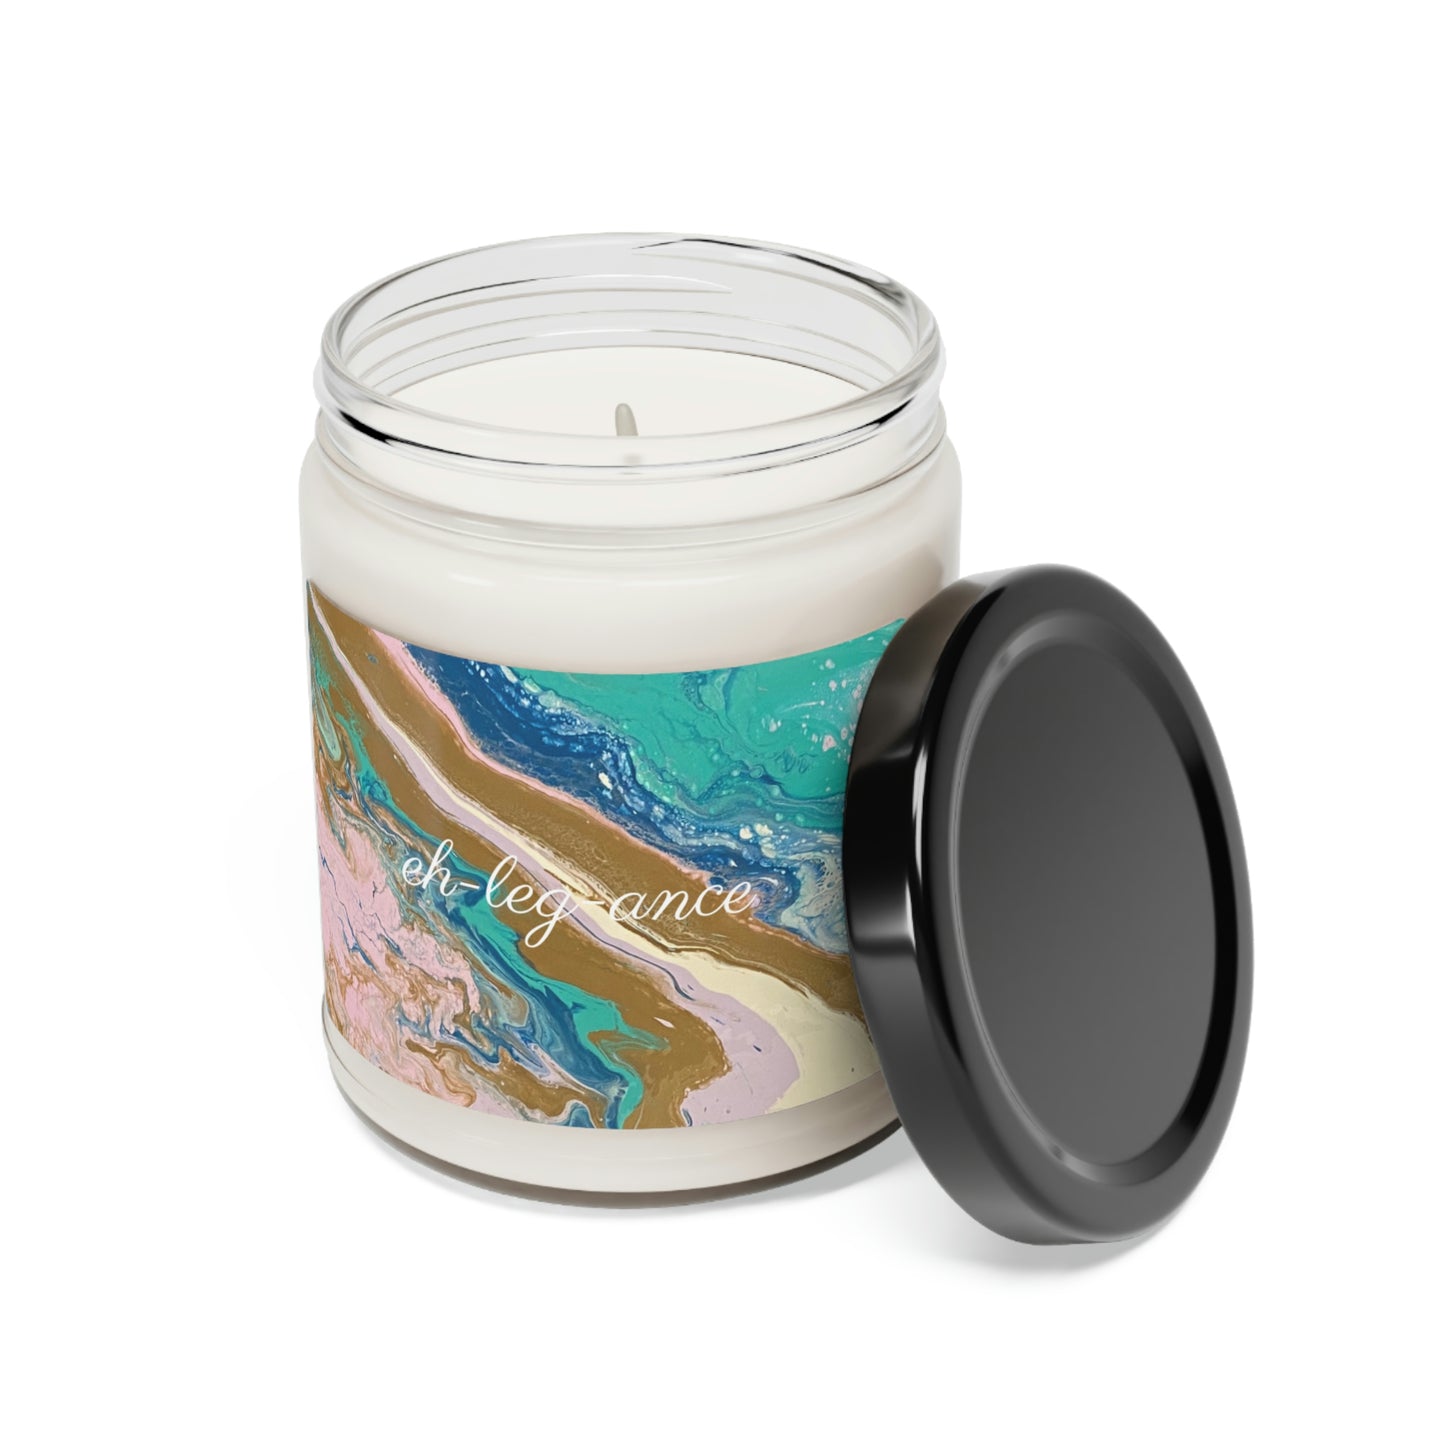 Eh-leg-ance Scented Soy Candle, 9oz